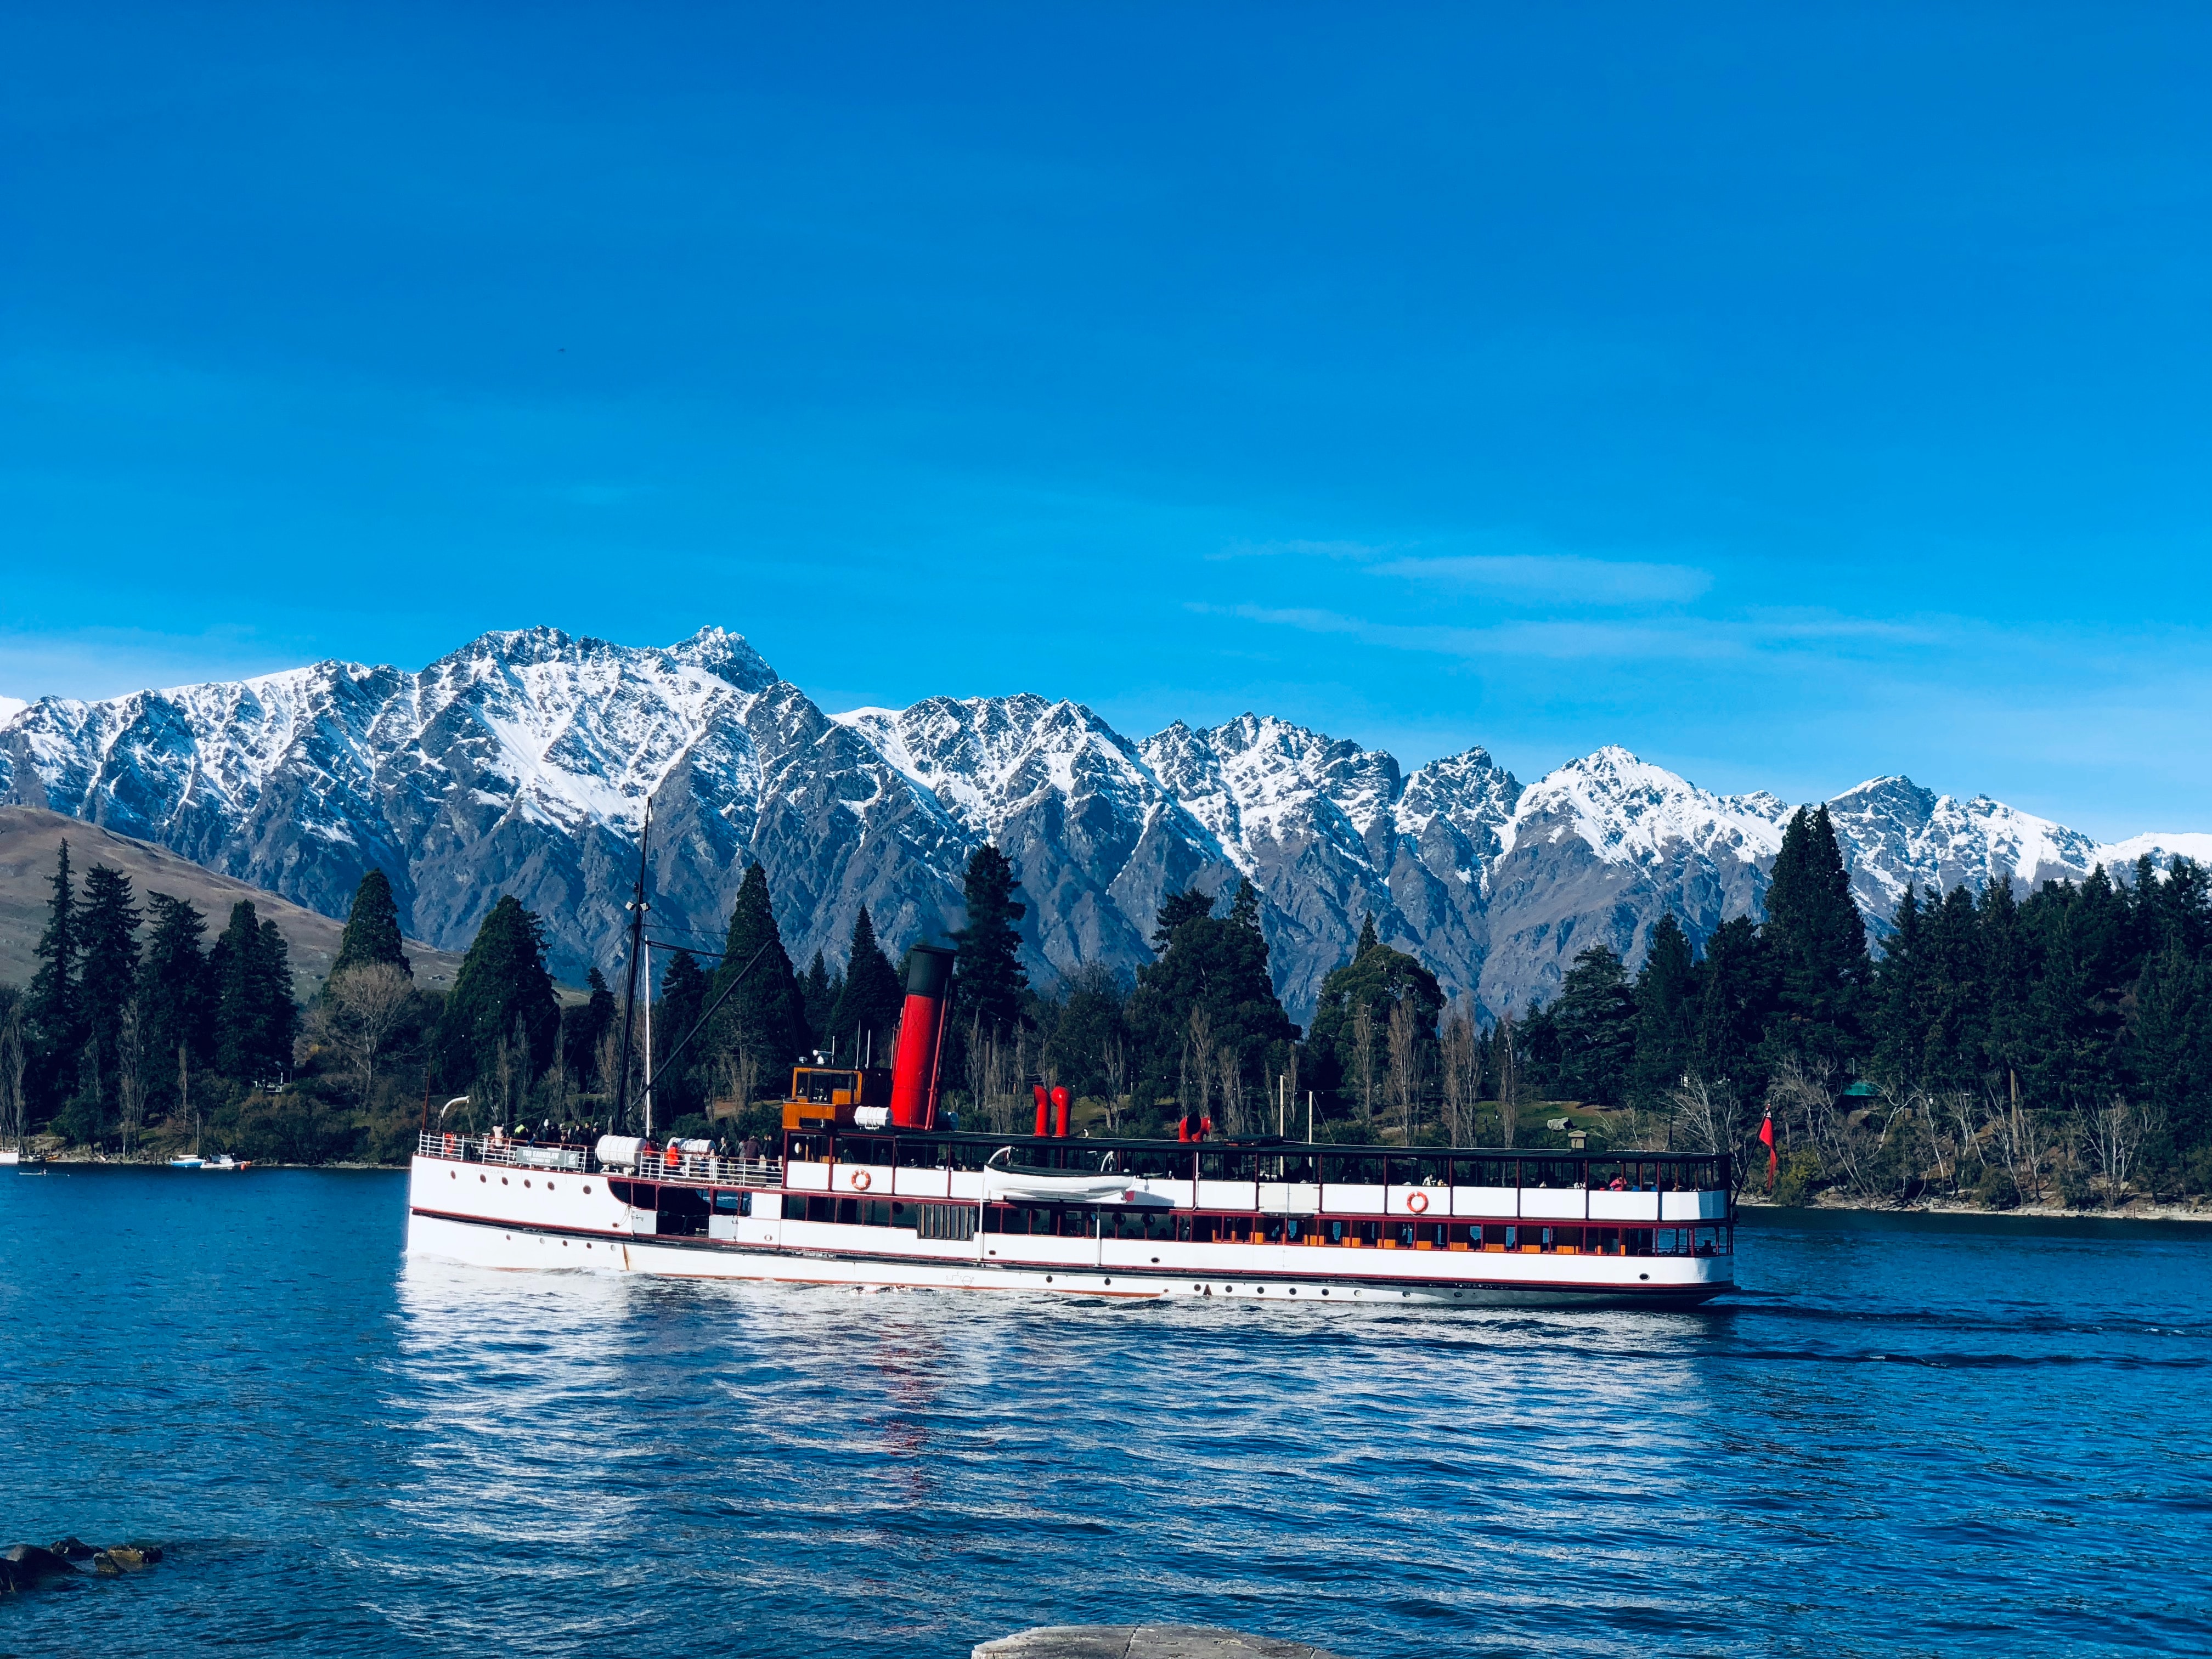 The historic steamer TSS Earnslaw on Lake Wakatipu with the Remarkables in the background - image Courtesy Kirsten Frosh And Unsplash